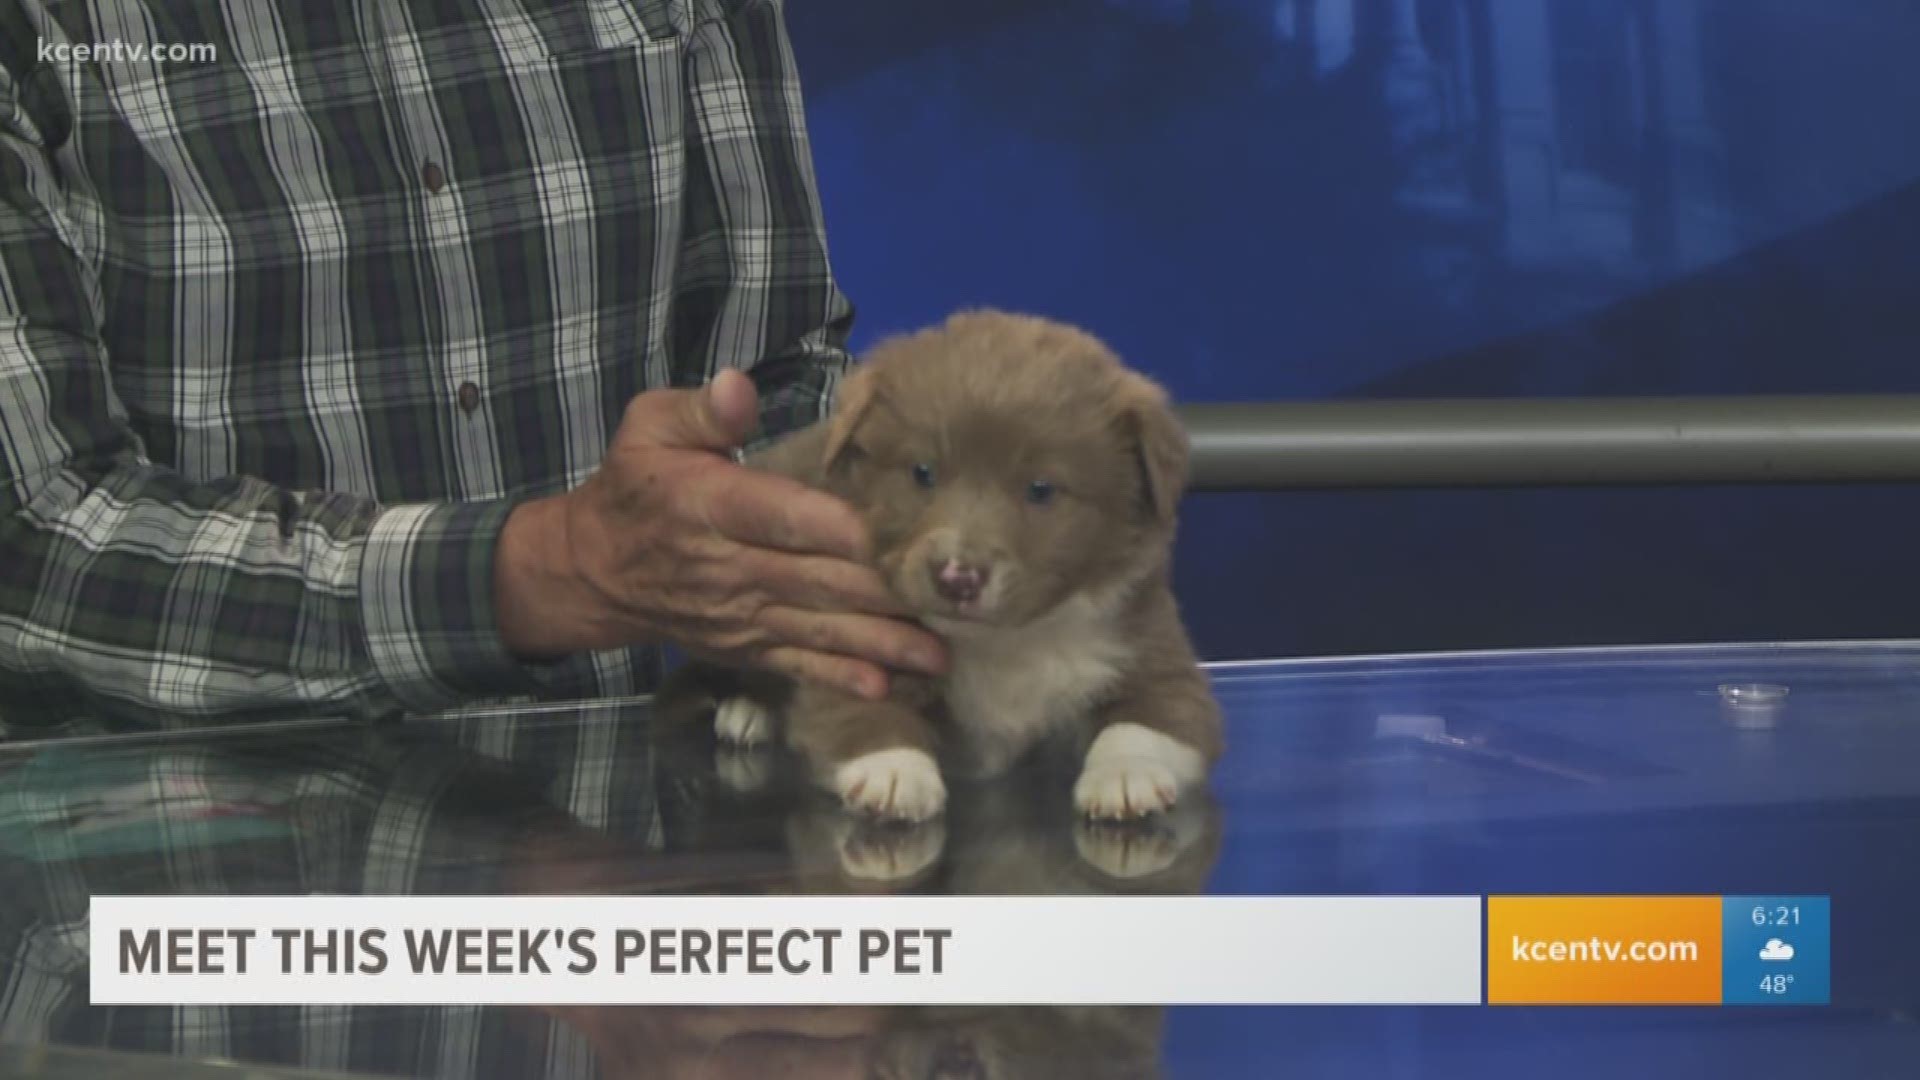 This Australian Shepherd puppy is available for adoption at 3 p.m. Thursday at the Humane Society of Central Texas.